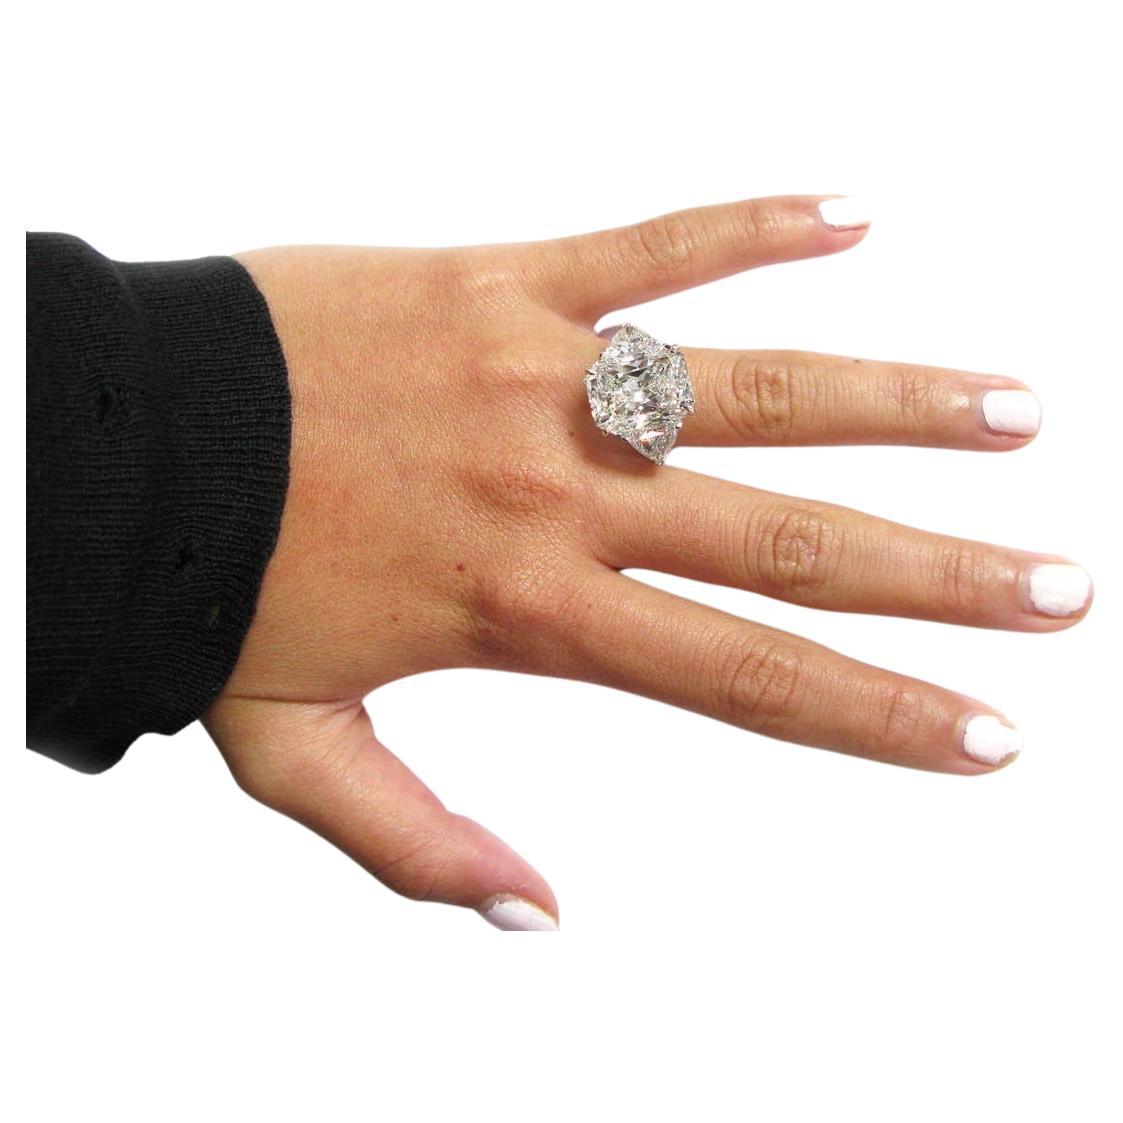 This exquisite ring features a GIA Certified 10.01 carat cushion cut diamond, elegantly set in a luxurious platinum band. The diamond boasts a G color grade, offering a near-colorless appearance that ensures a bright and captivating sparkle. With a